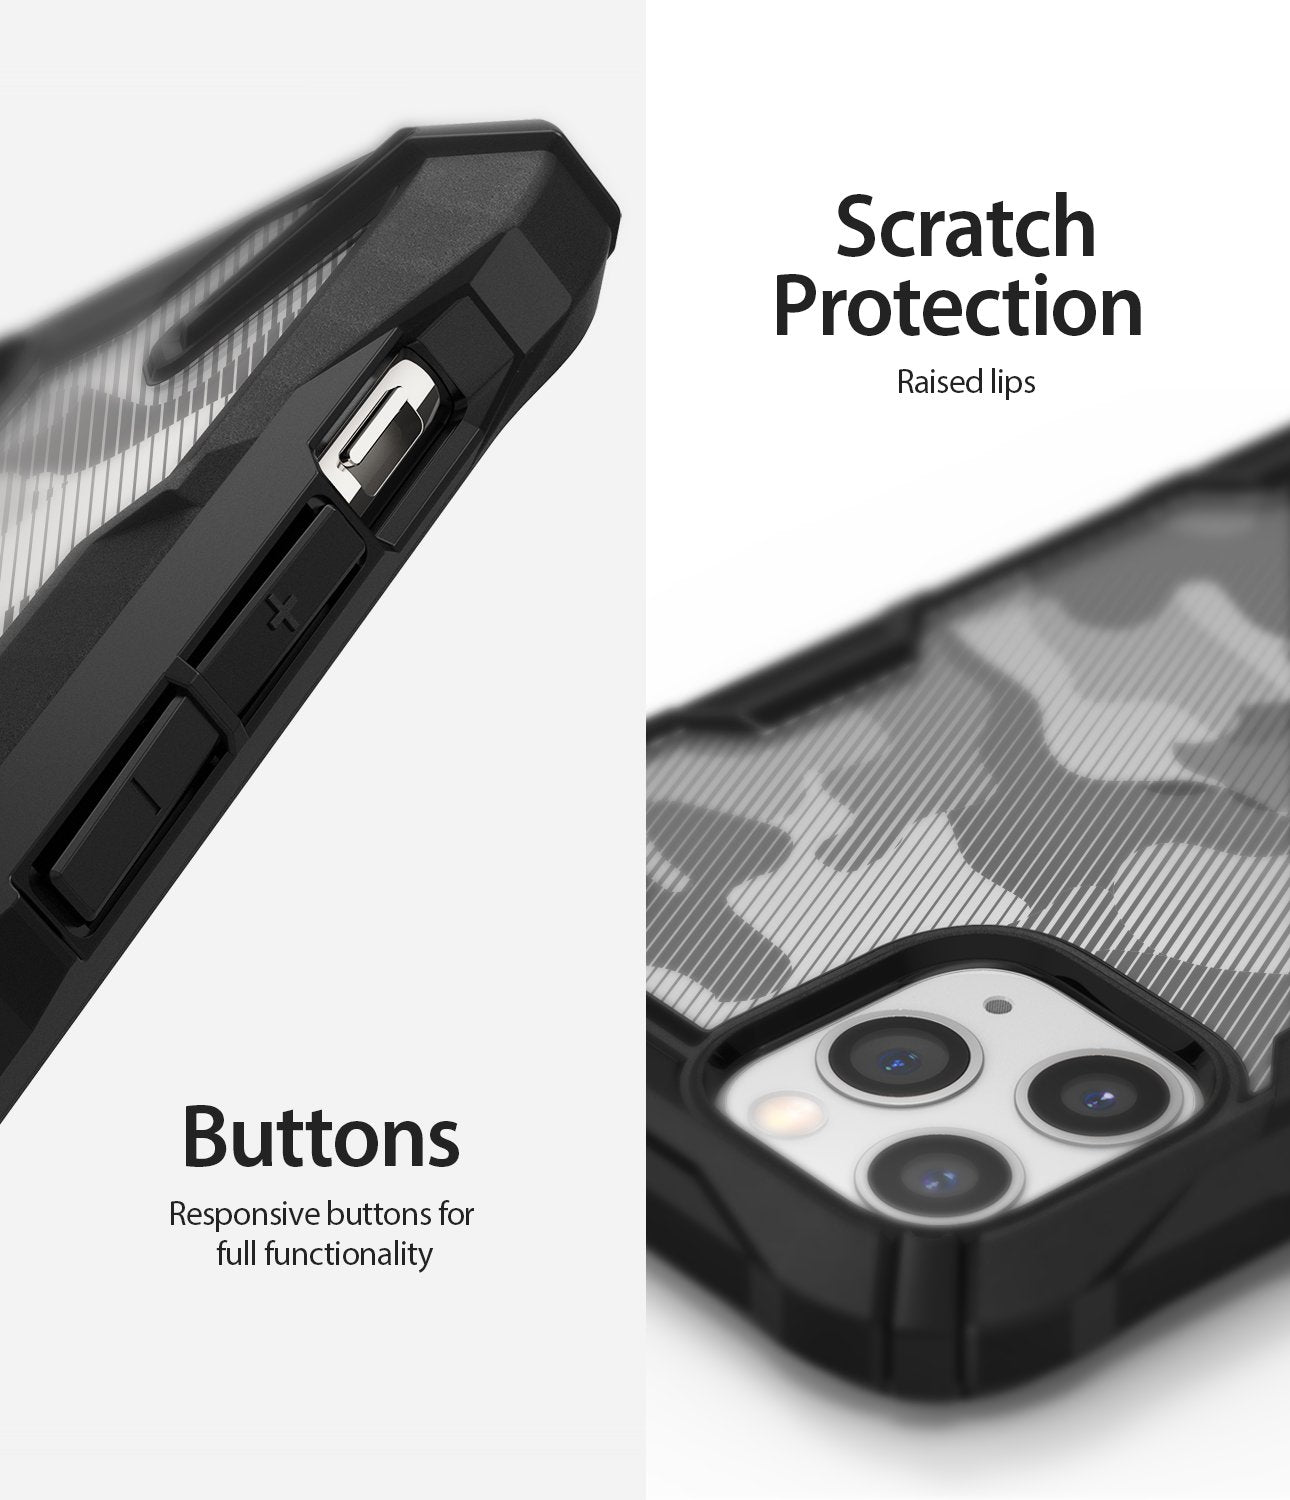 ringke fusion-x ddp case compatible with iphone 11 pro (2019) - Camo Black